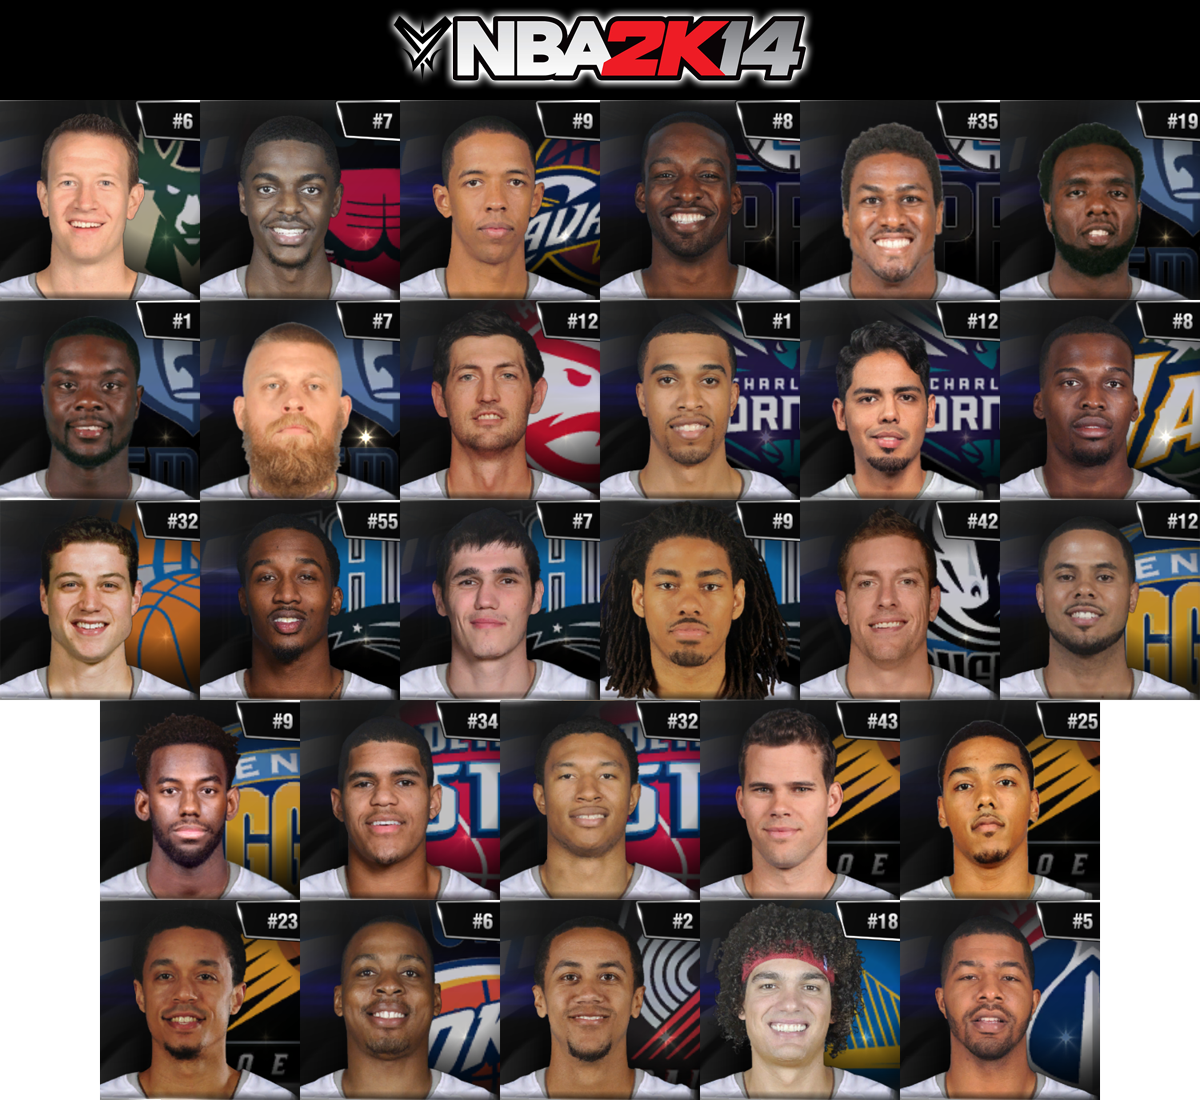 nba 2k14 roster updated